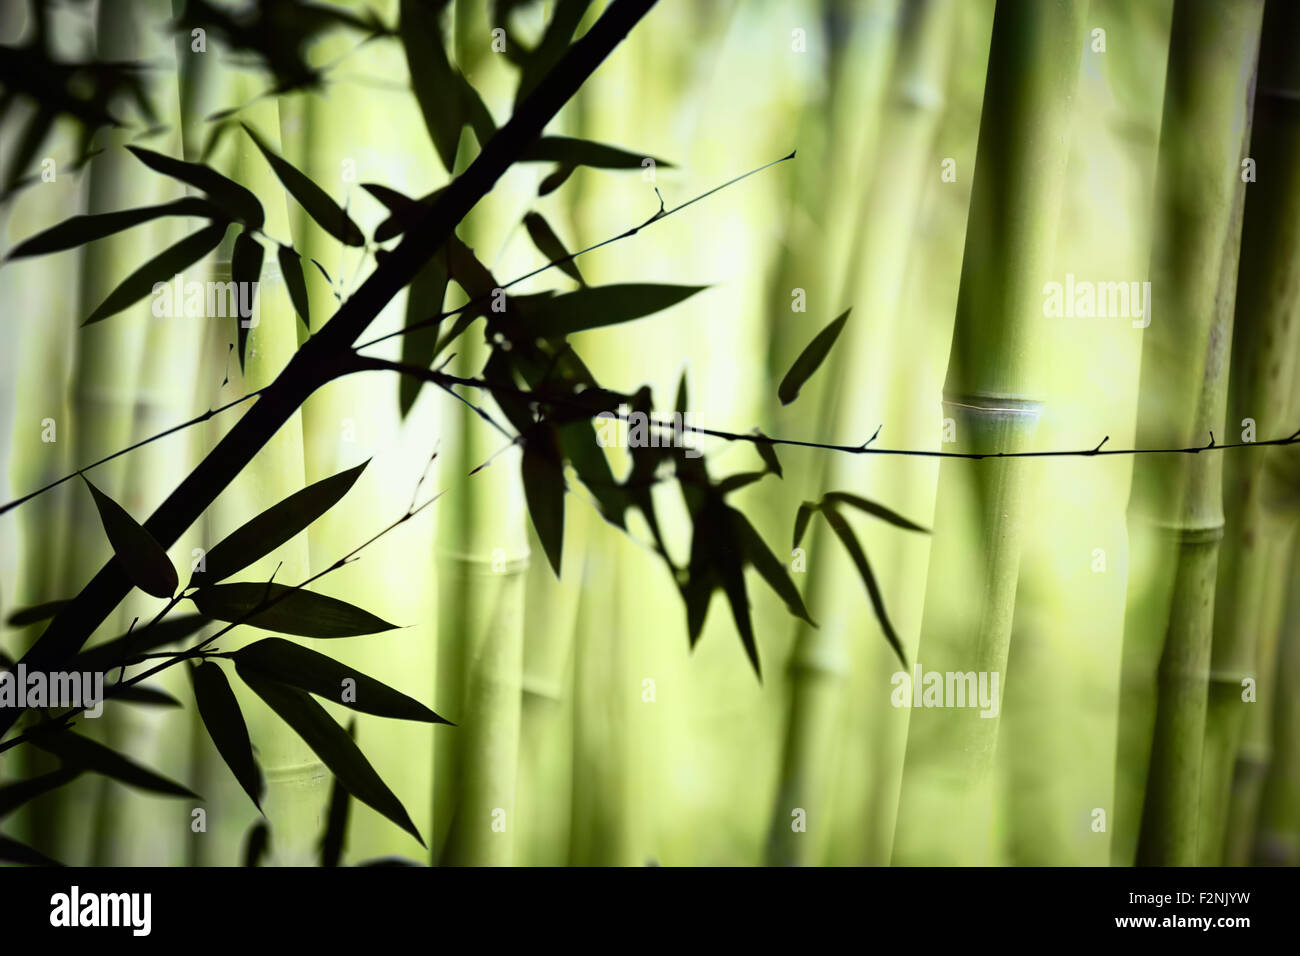 Asian Bamboo forest Stockfoto